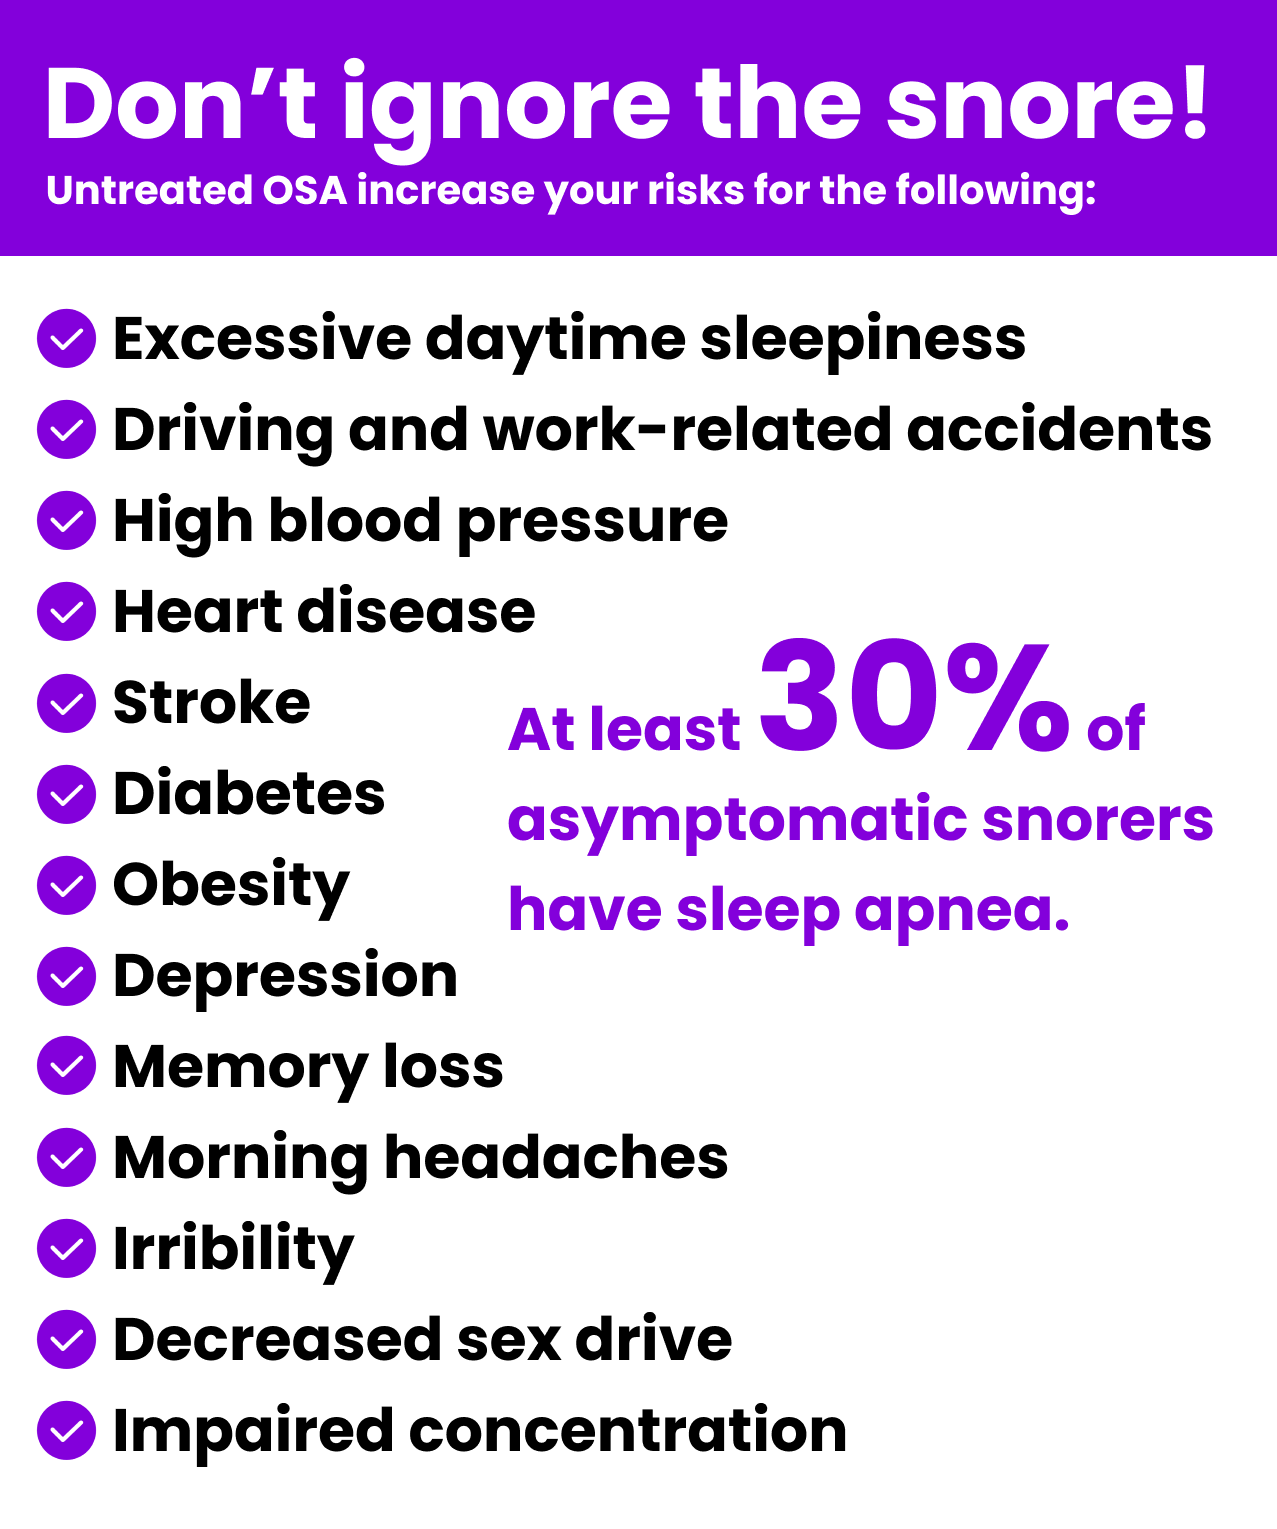 Don't ignore the snore, OSA infographic.